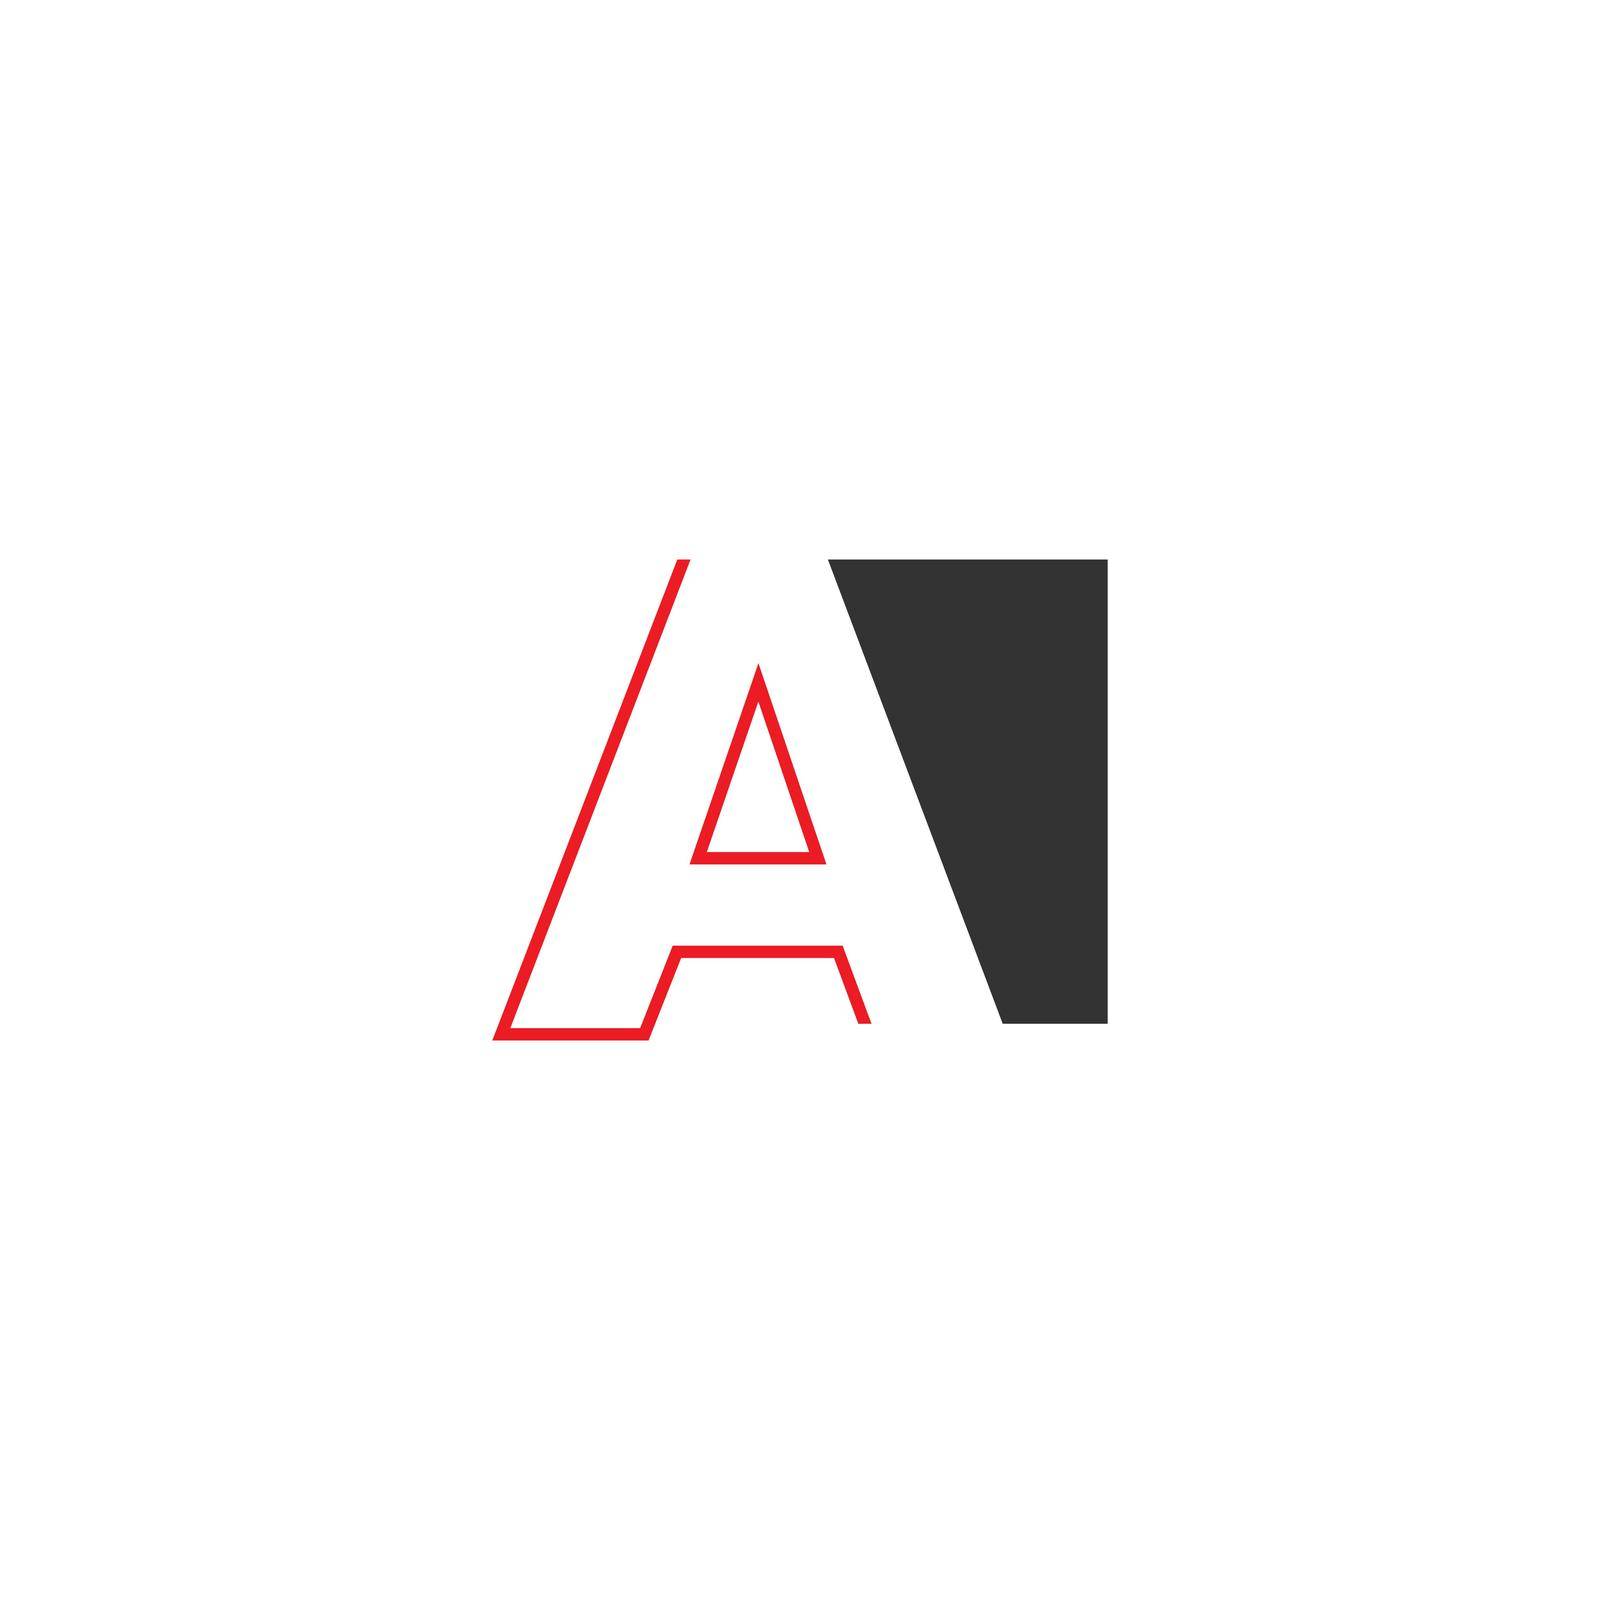 Letter A on square design by bellaxbudhong3